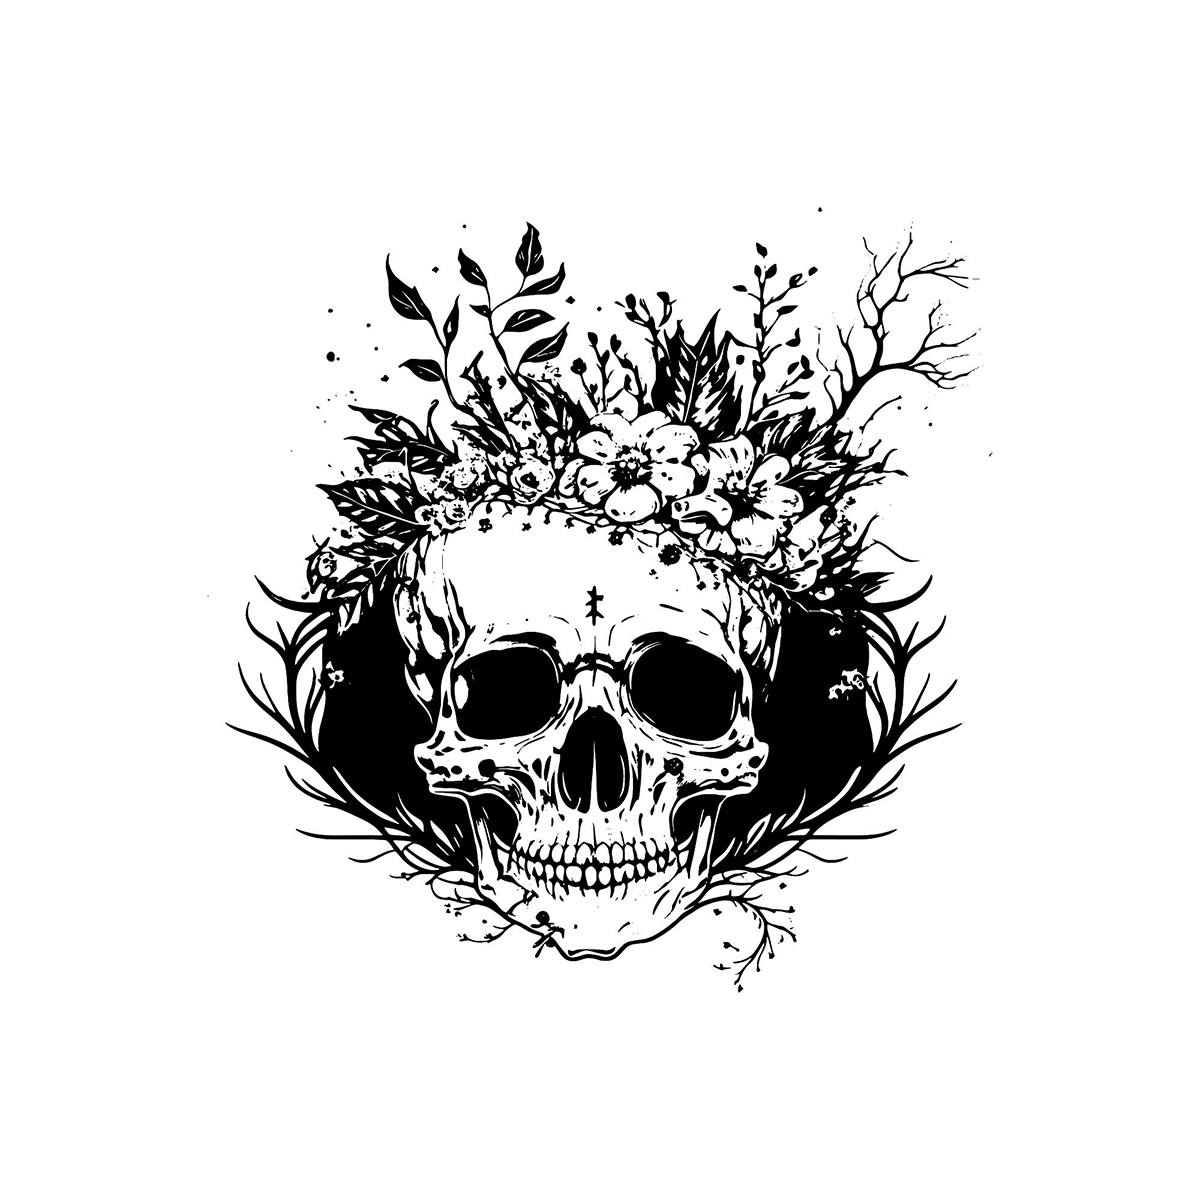 Black and white drawing of a skull with flowers.